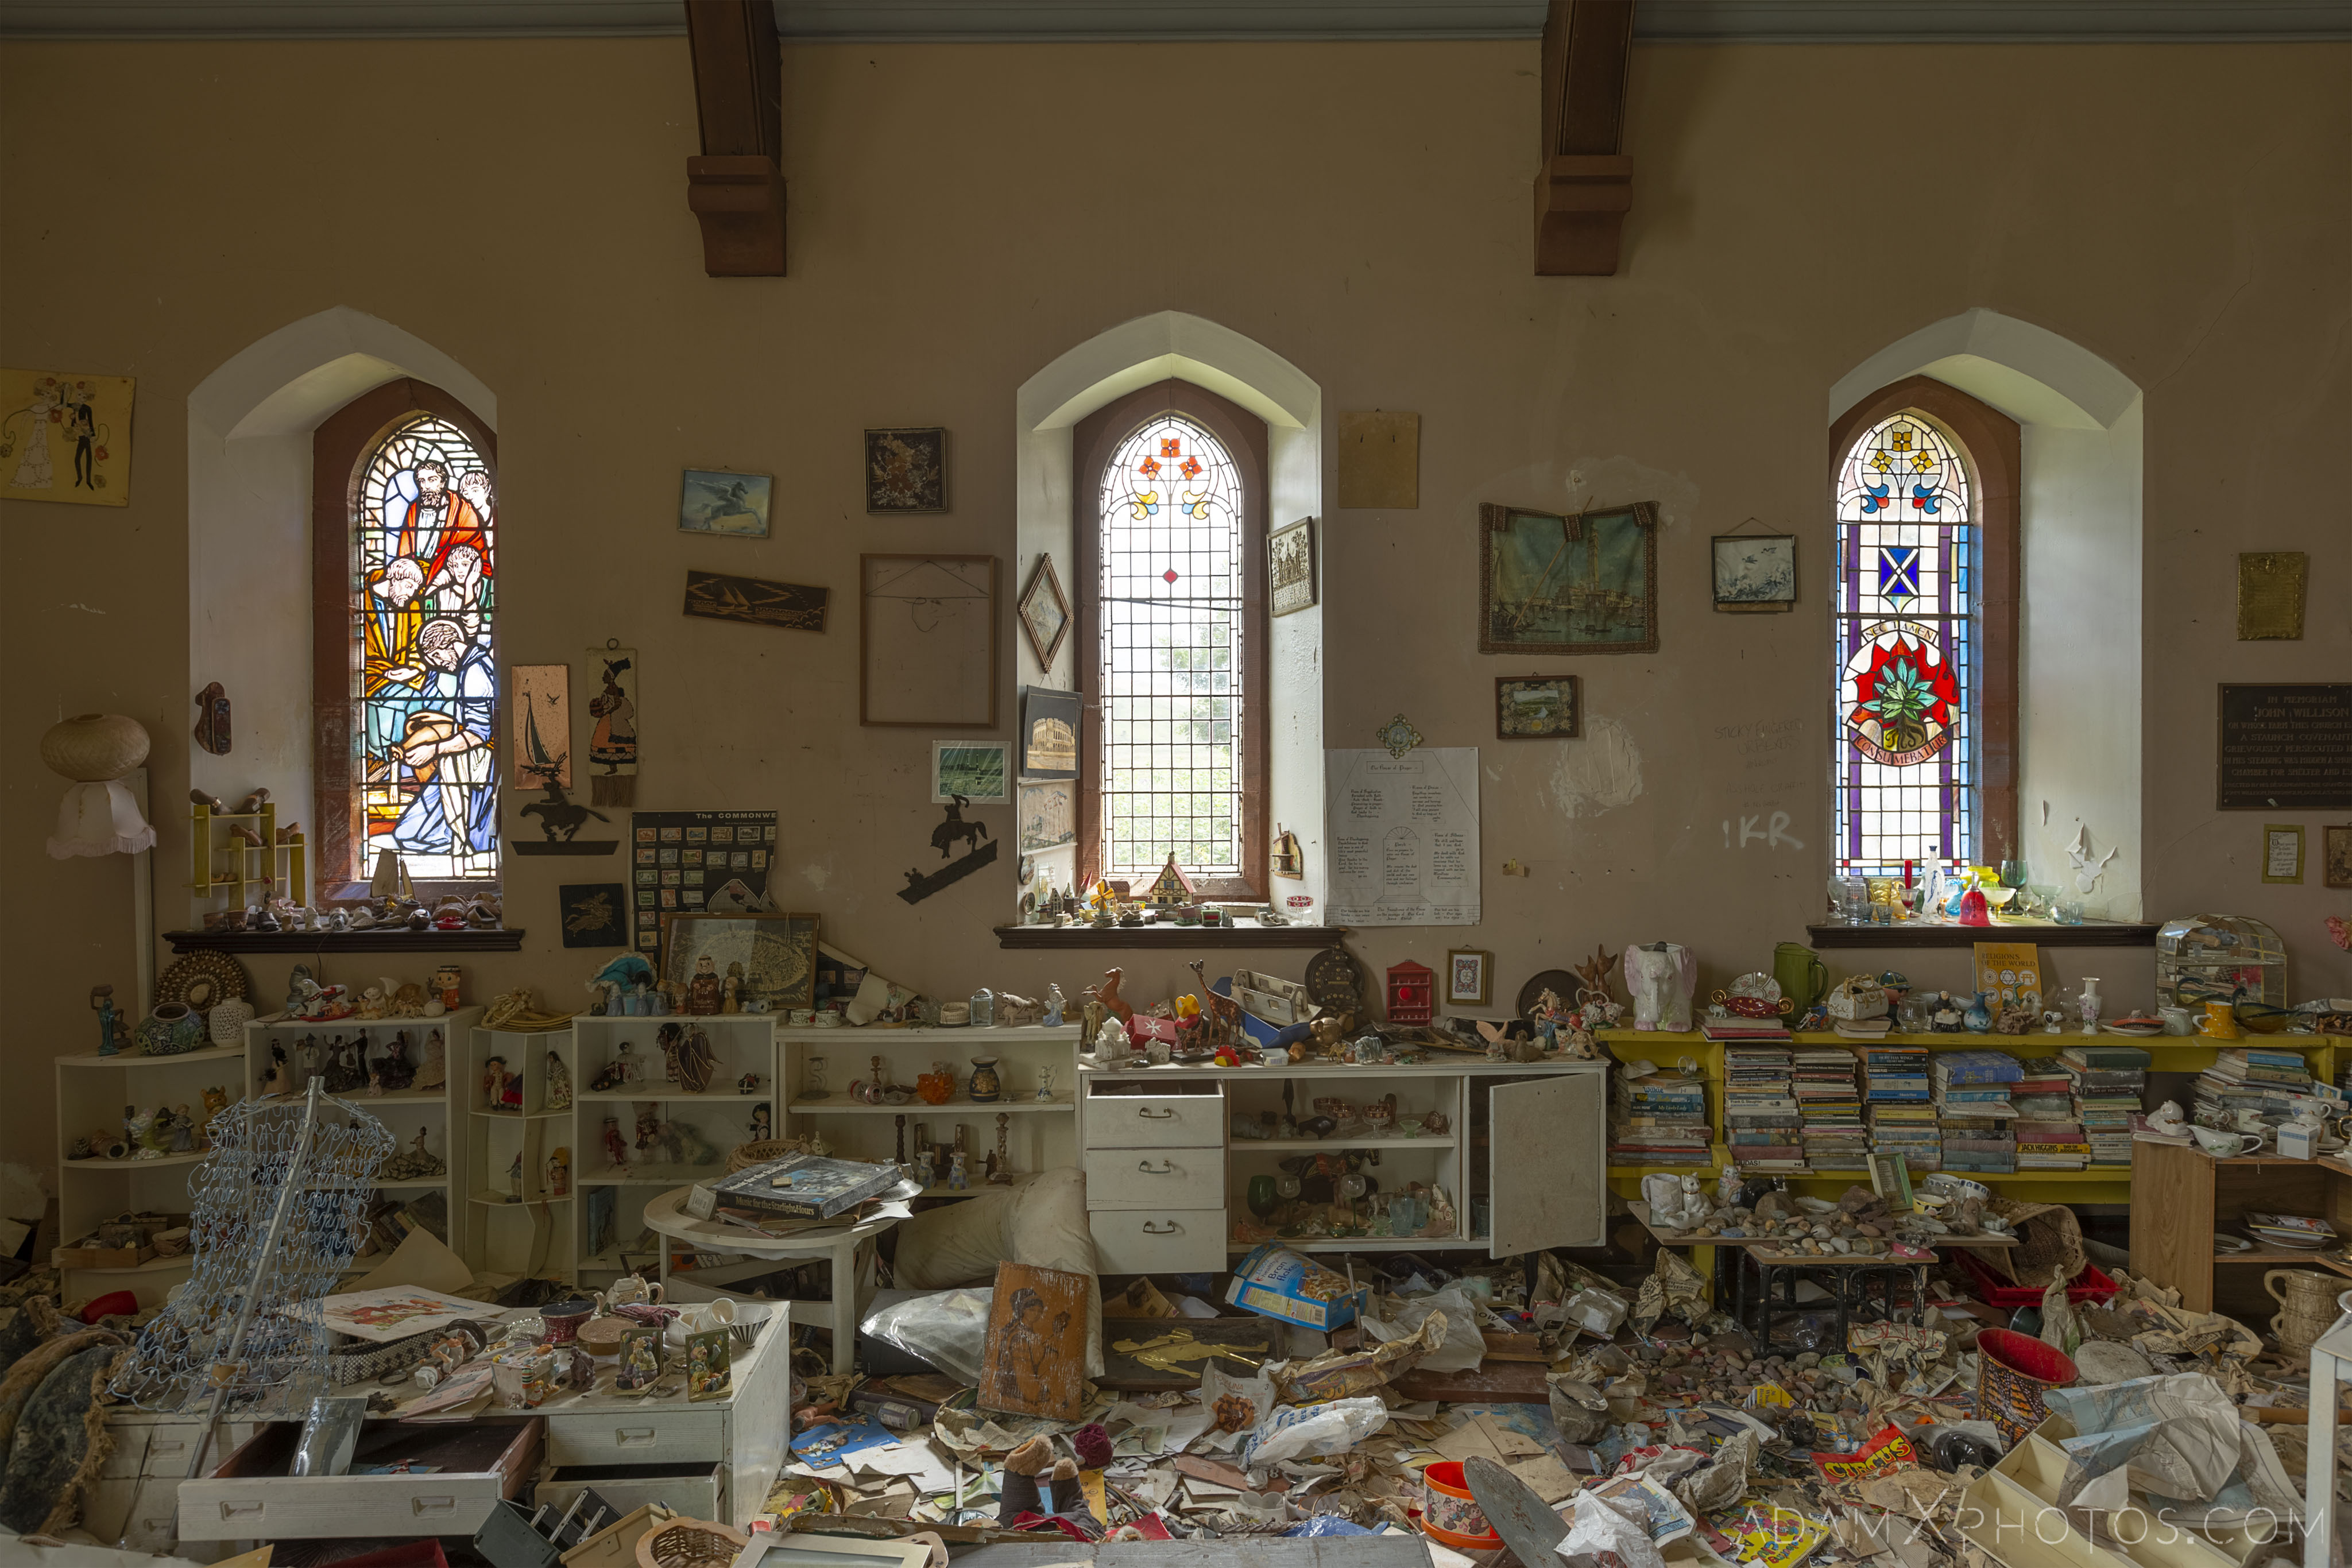 toys ornaments books stained glass windows Elvanfoot Parish Church Hoarder Hoarders Church Adam X Urbex Urban Exploration Access 2018 Abandoned decay lost forgotten derelict location creepy haunting eerie